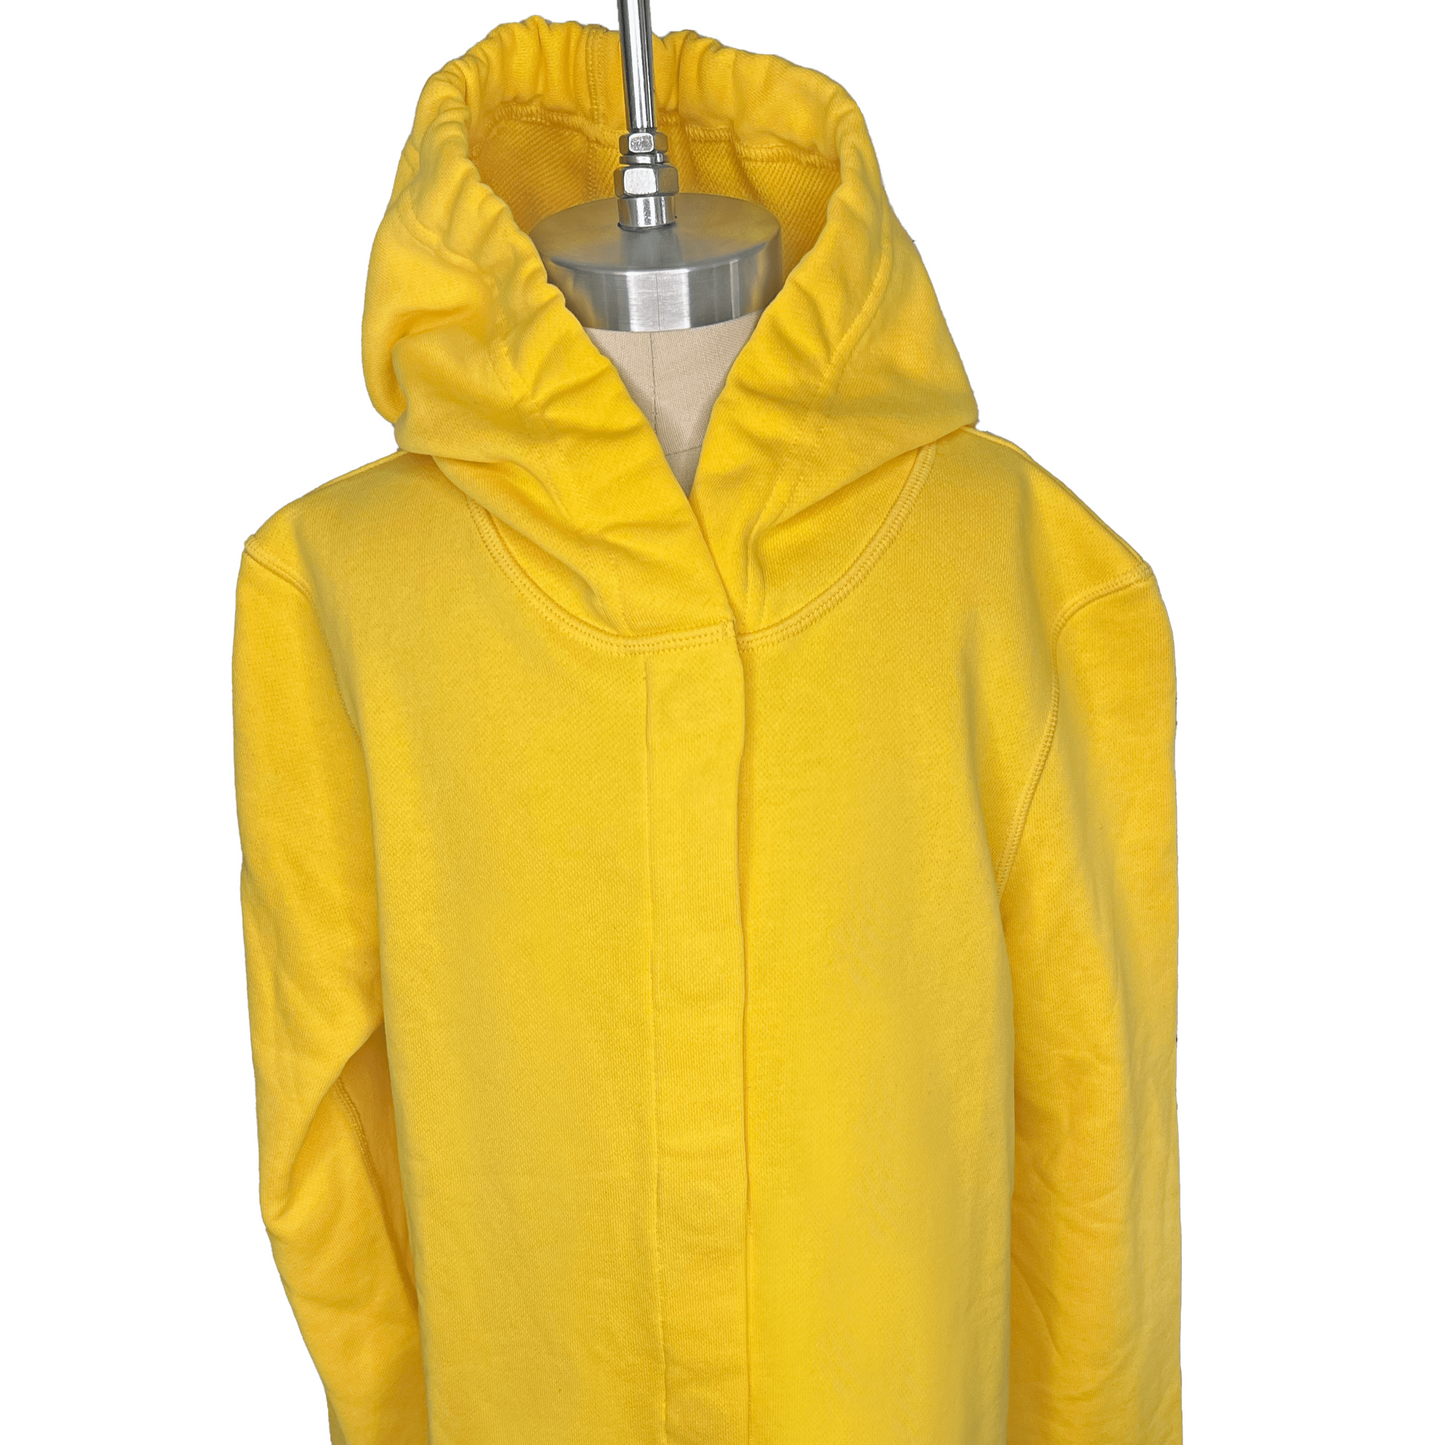 Sensory friendly hoodie with no tags and magnetic closures for fine motor independence